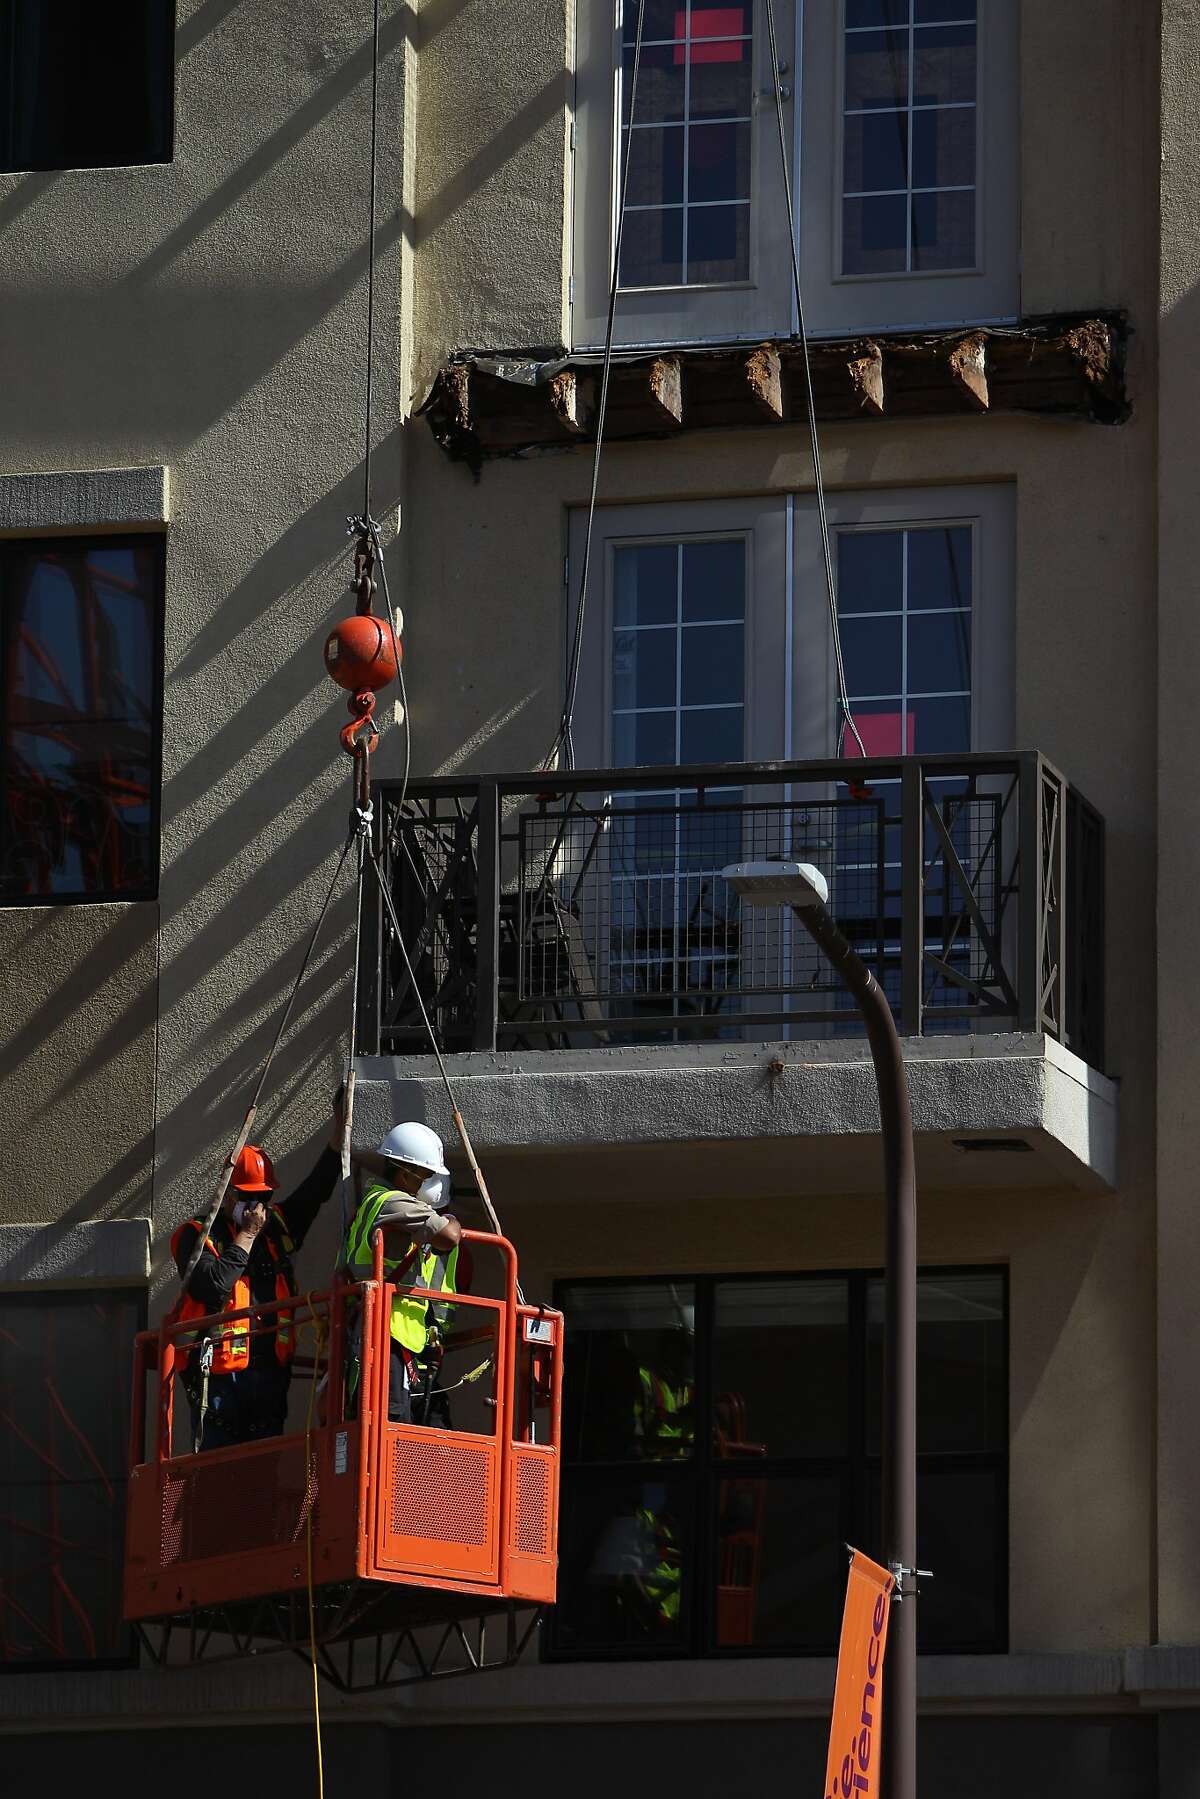 A balcony below the one that collapsed is worked on at 2020 Kittredge Street in Berkeley, California, on Tuesday, June 16, 2015. The collapse, which took place in the early hours of Tuesday, killed 6 and injured others.